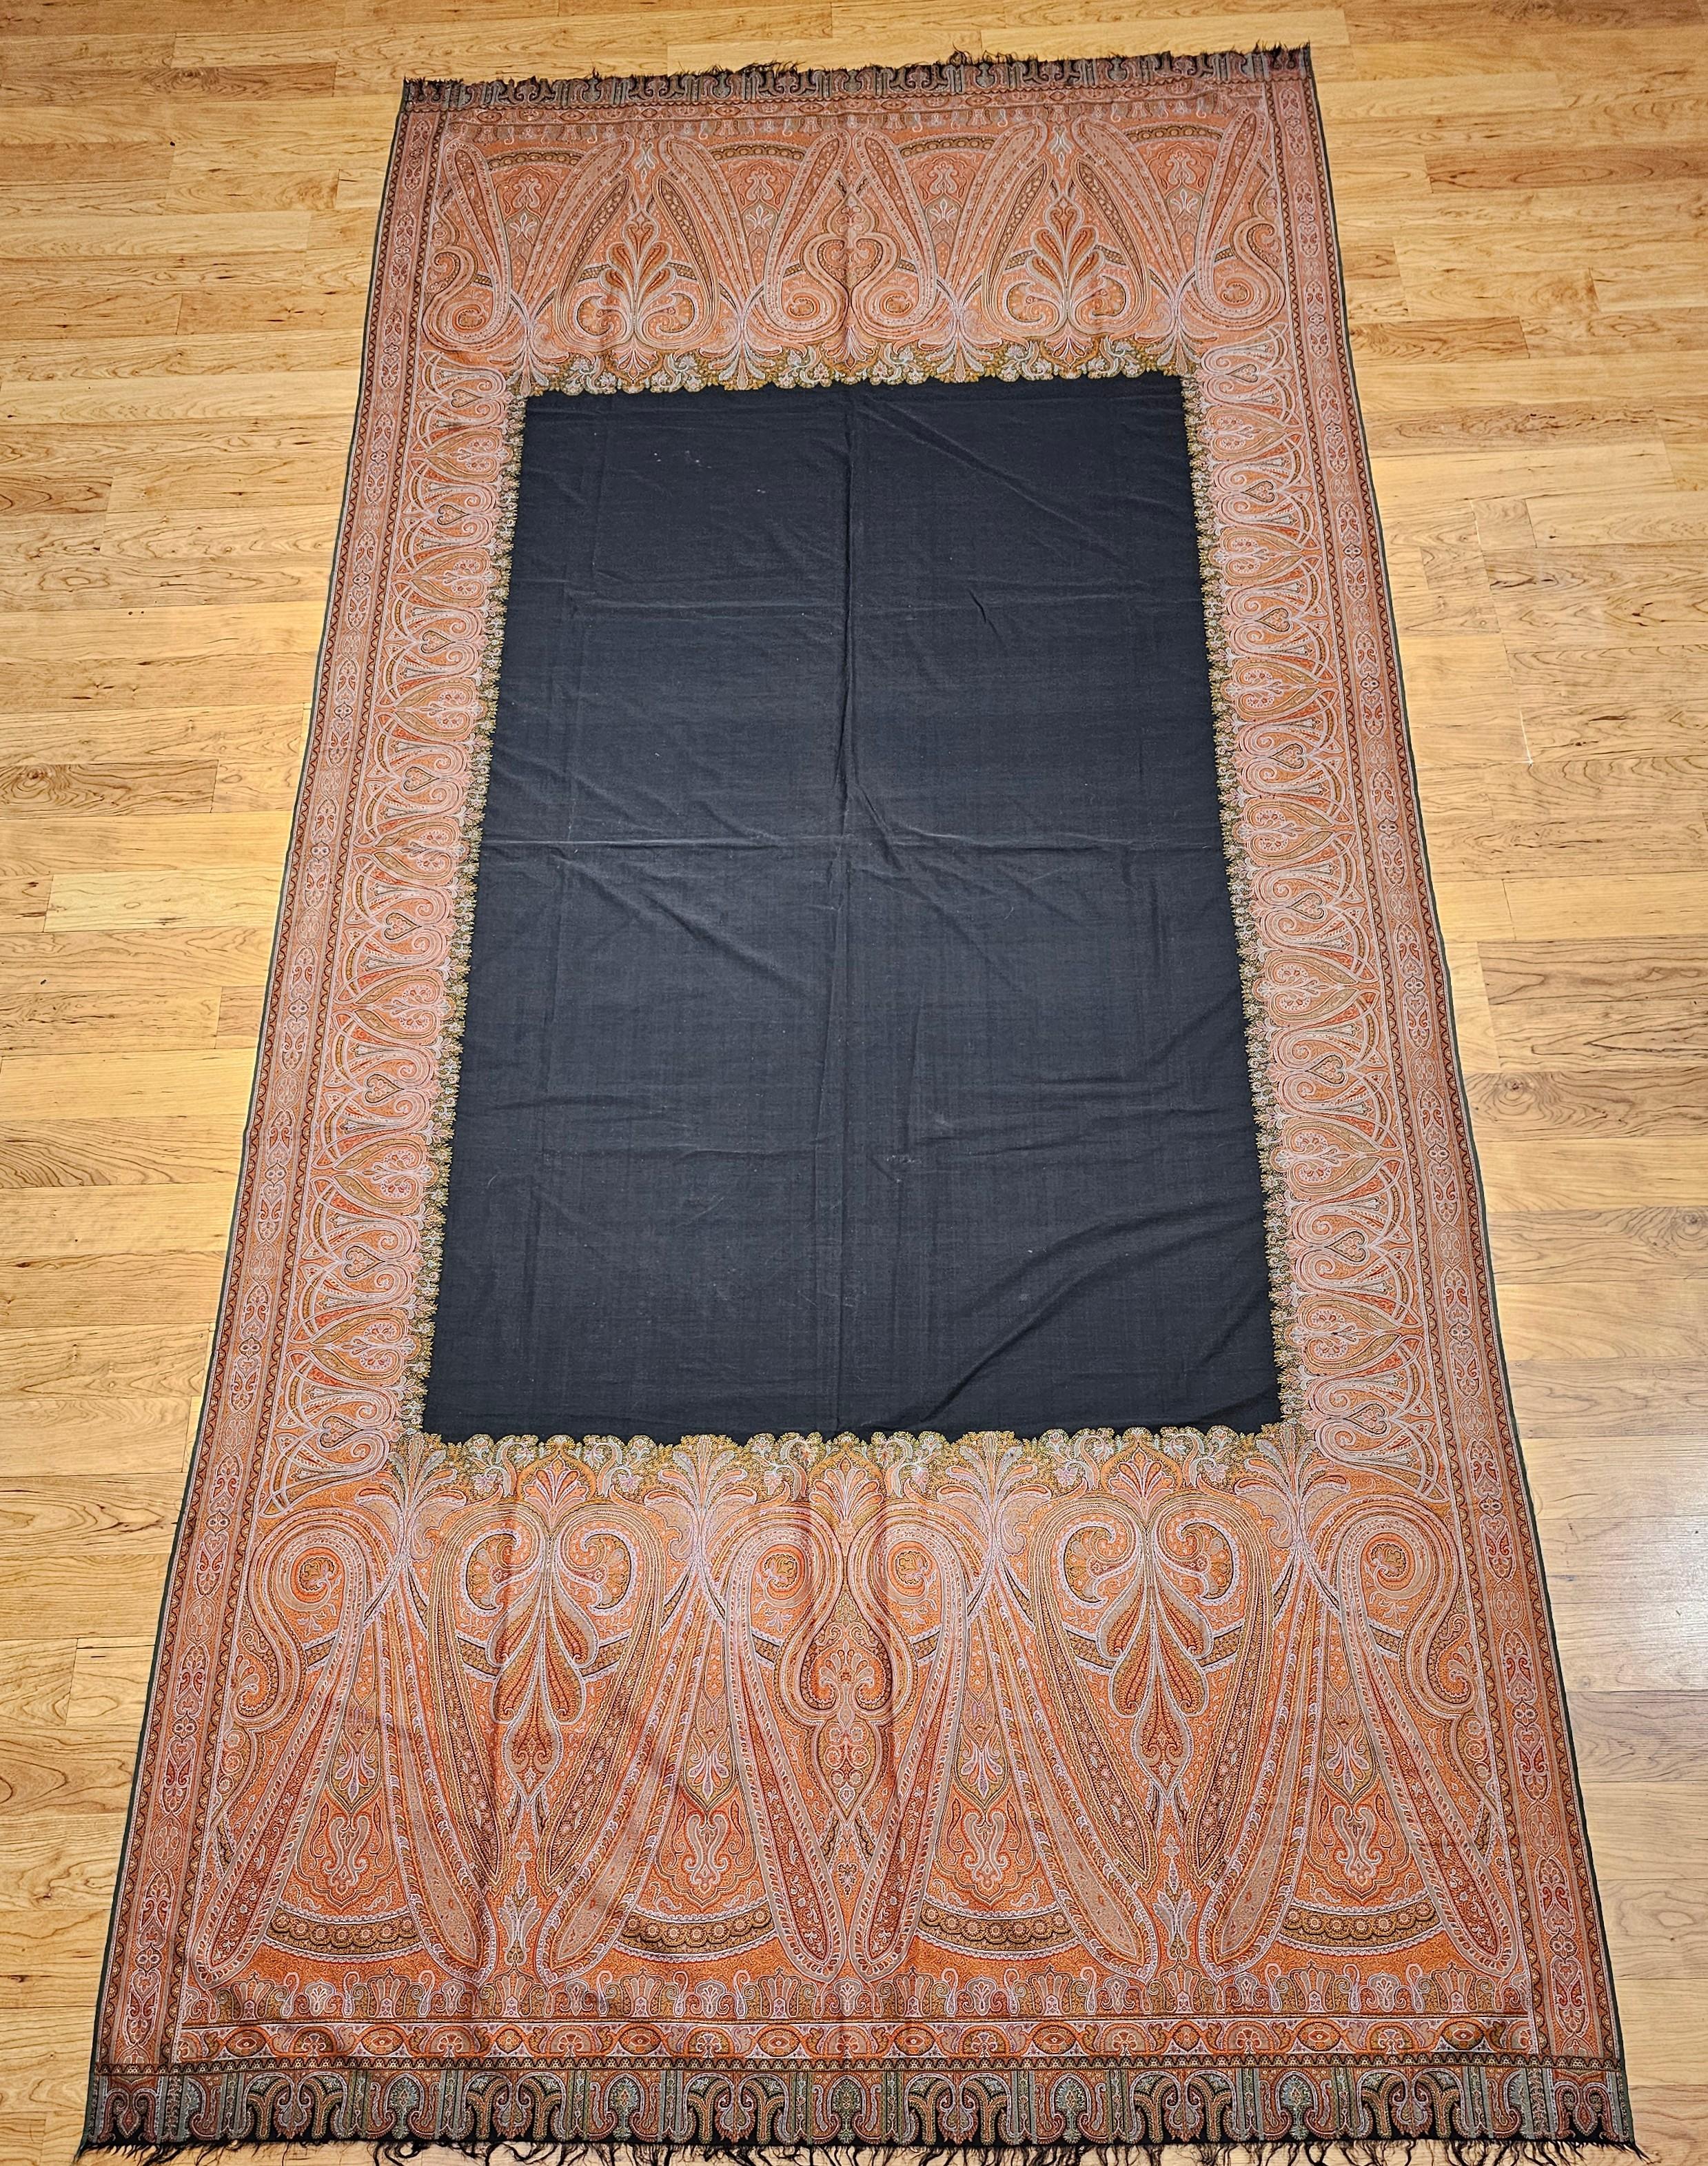 19th Century Hand-Woven Kashmiri Paisley Shawl in Brick Red, Black, Green For Sale 8